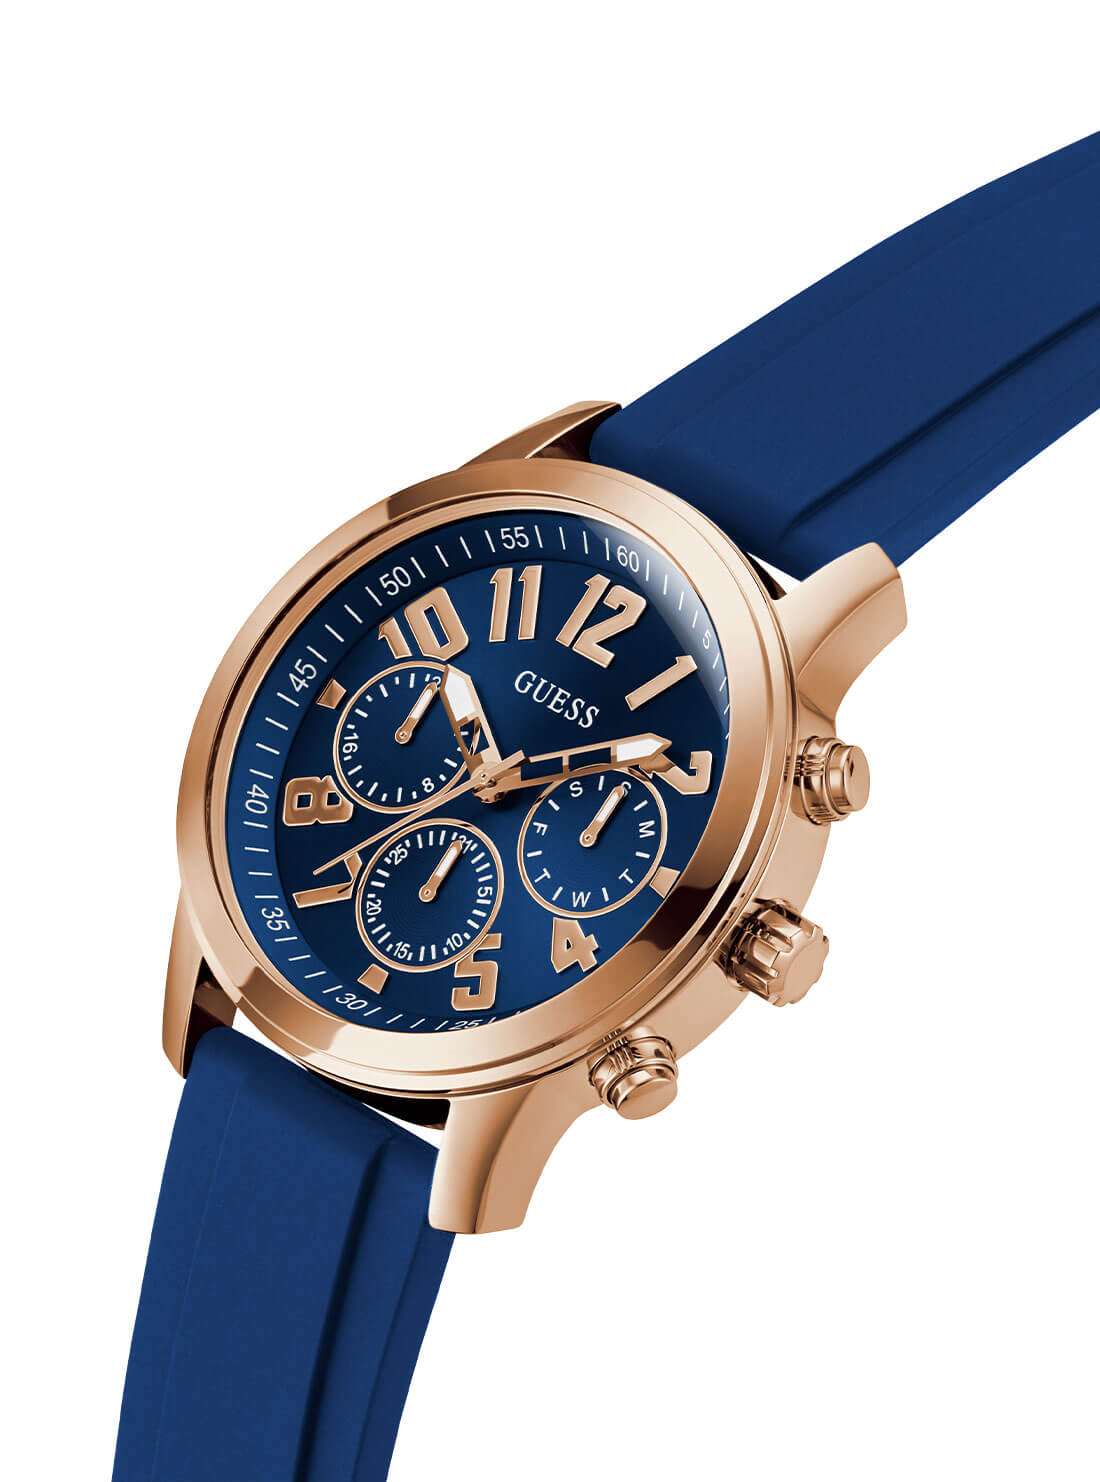 Gold Parker Navy Blue Silicone Watch | GUESS Men's Watches | detail view